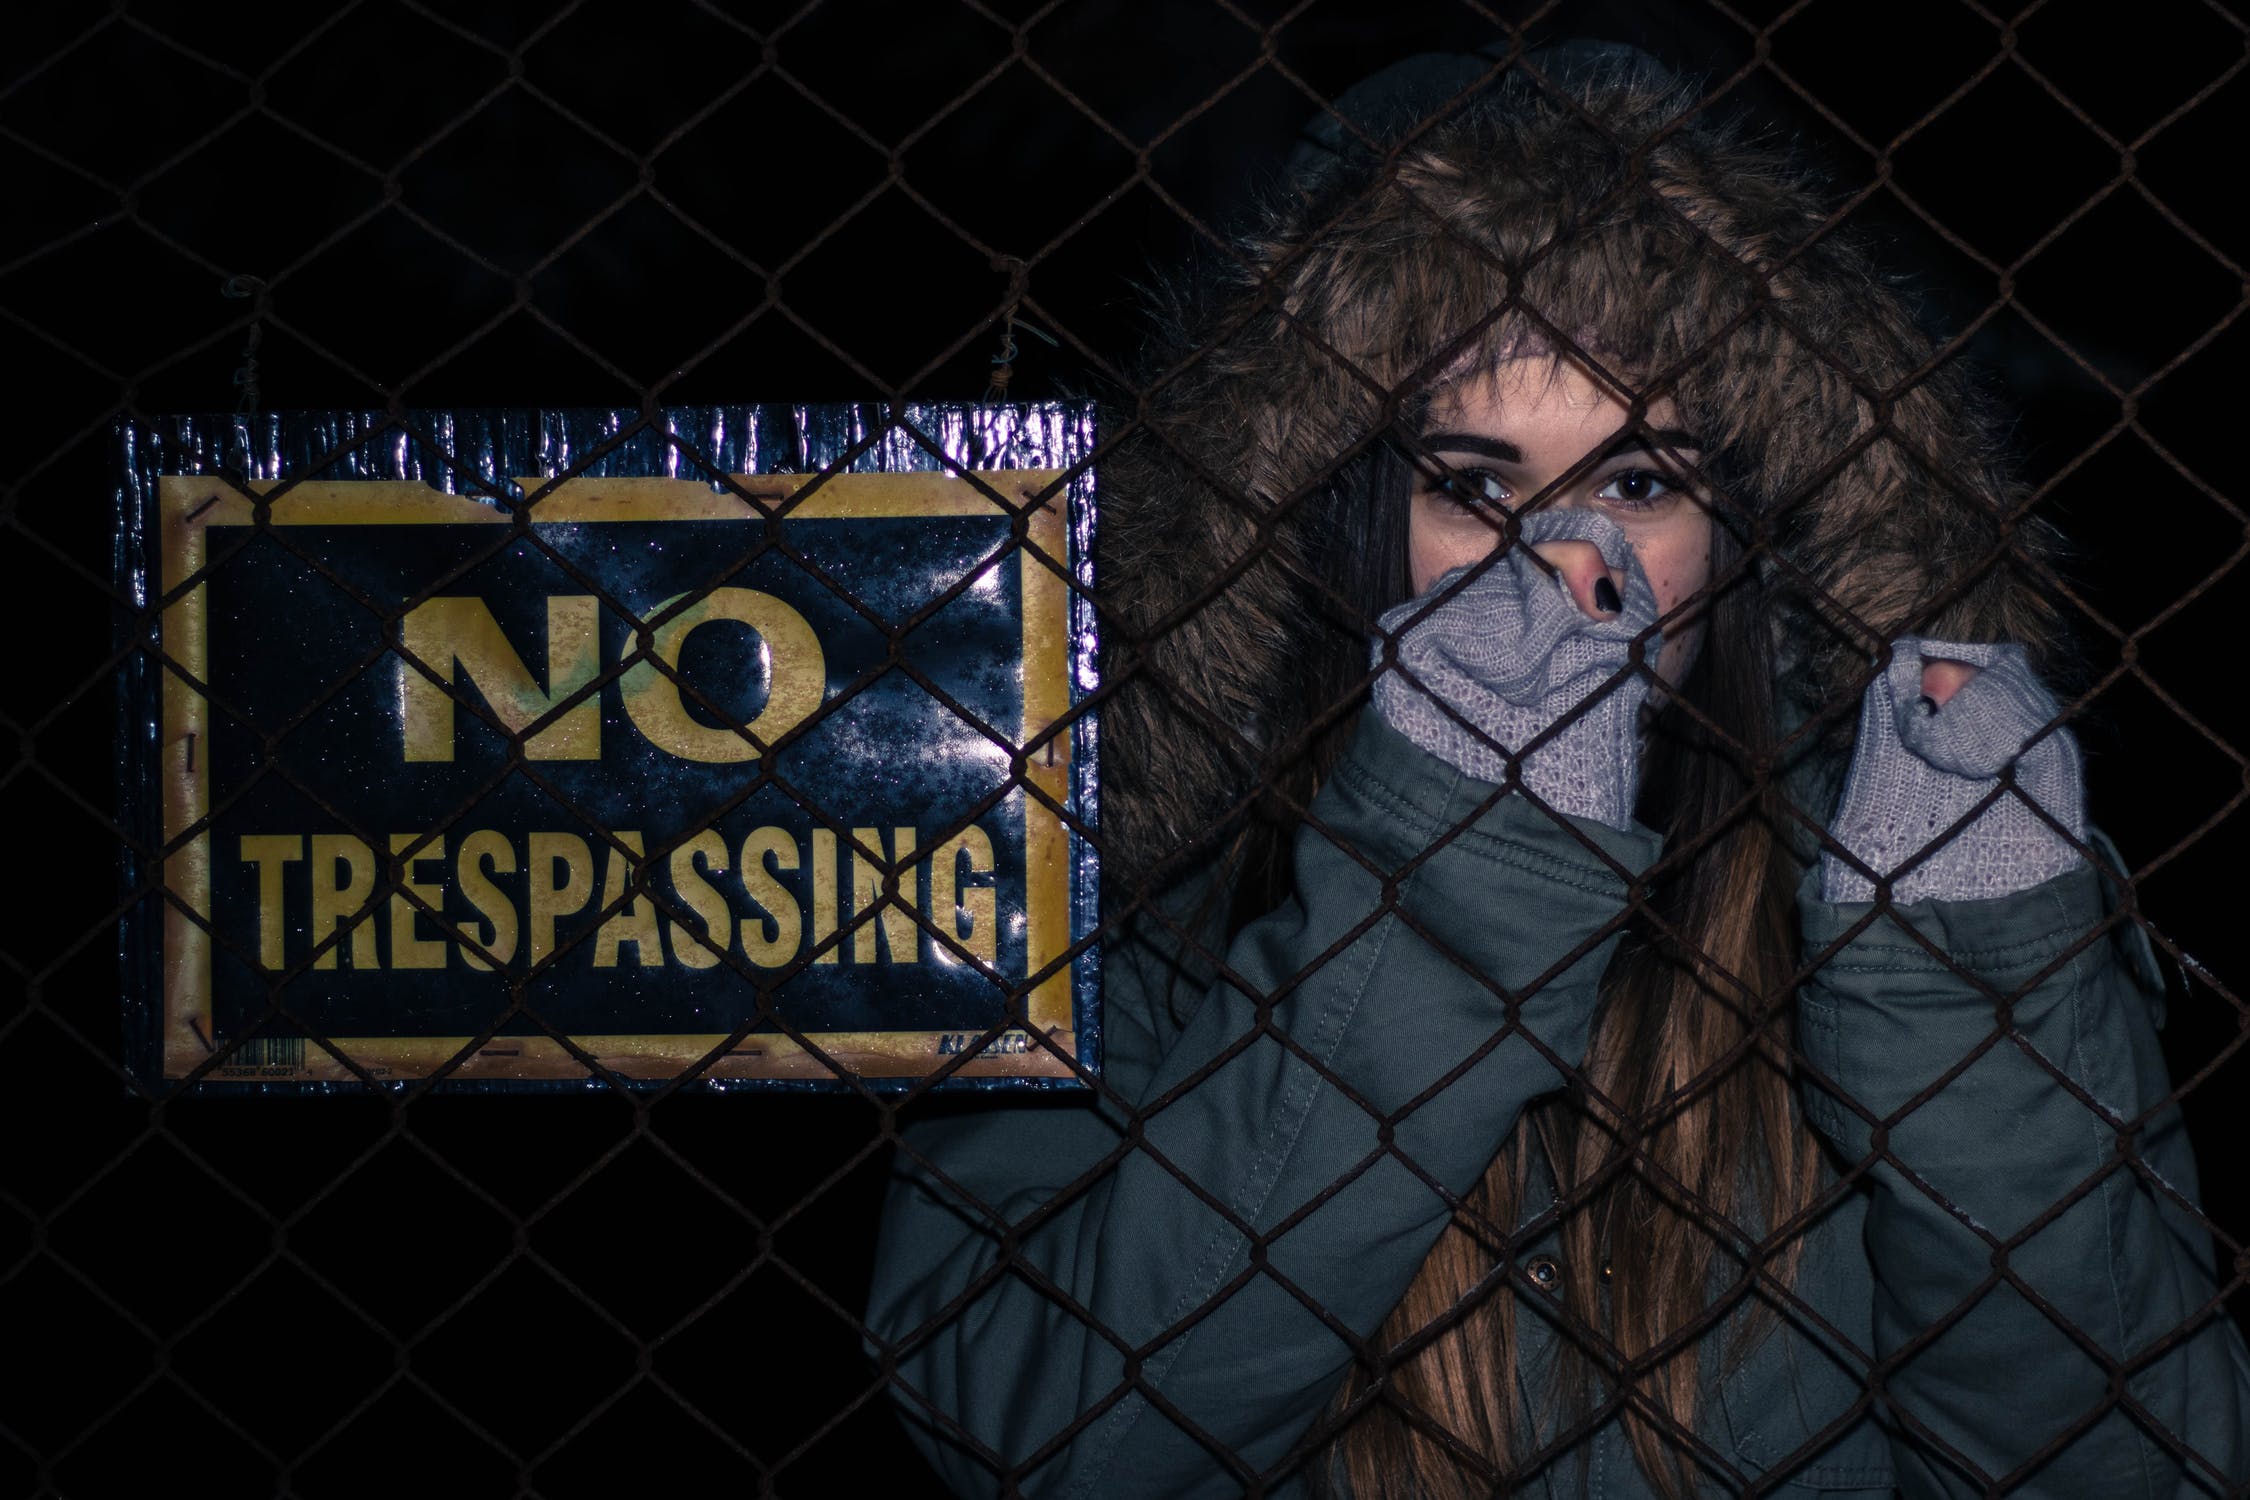 Woman Trespassing Behind Fence With No Trespassing Sign On It